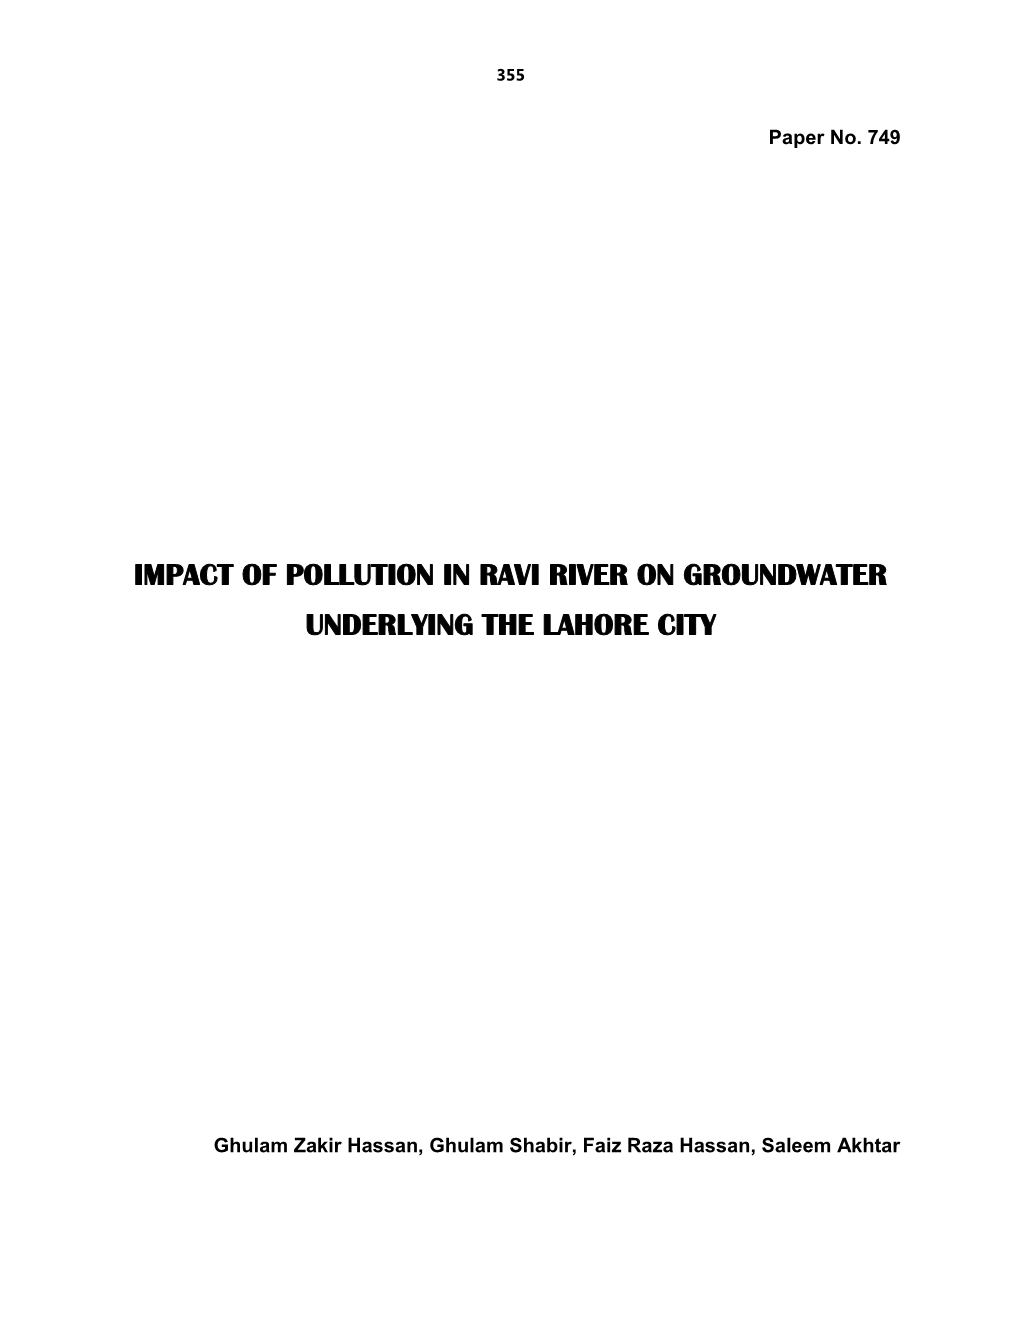 Impact of Pollution in Ravi River on Groundwater Underlying the Lahore City